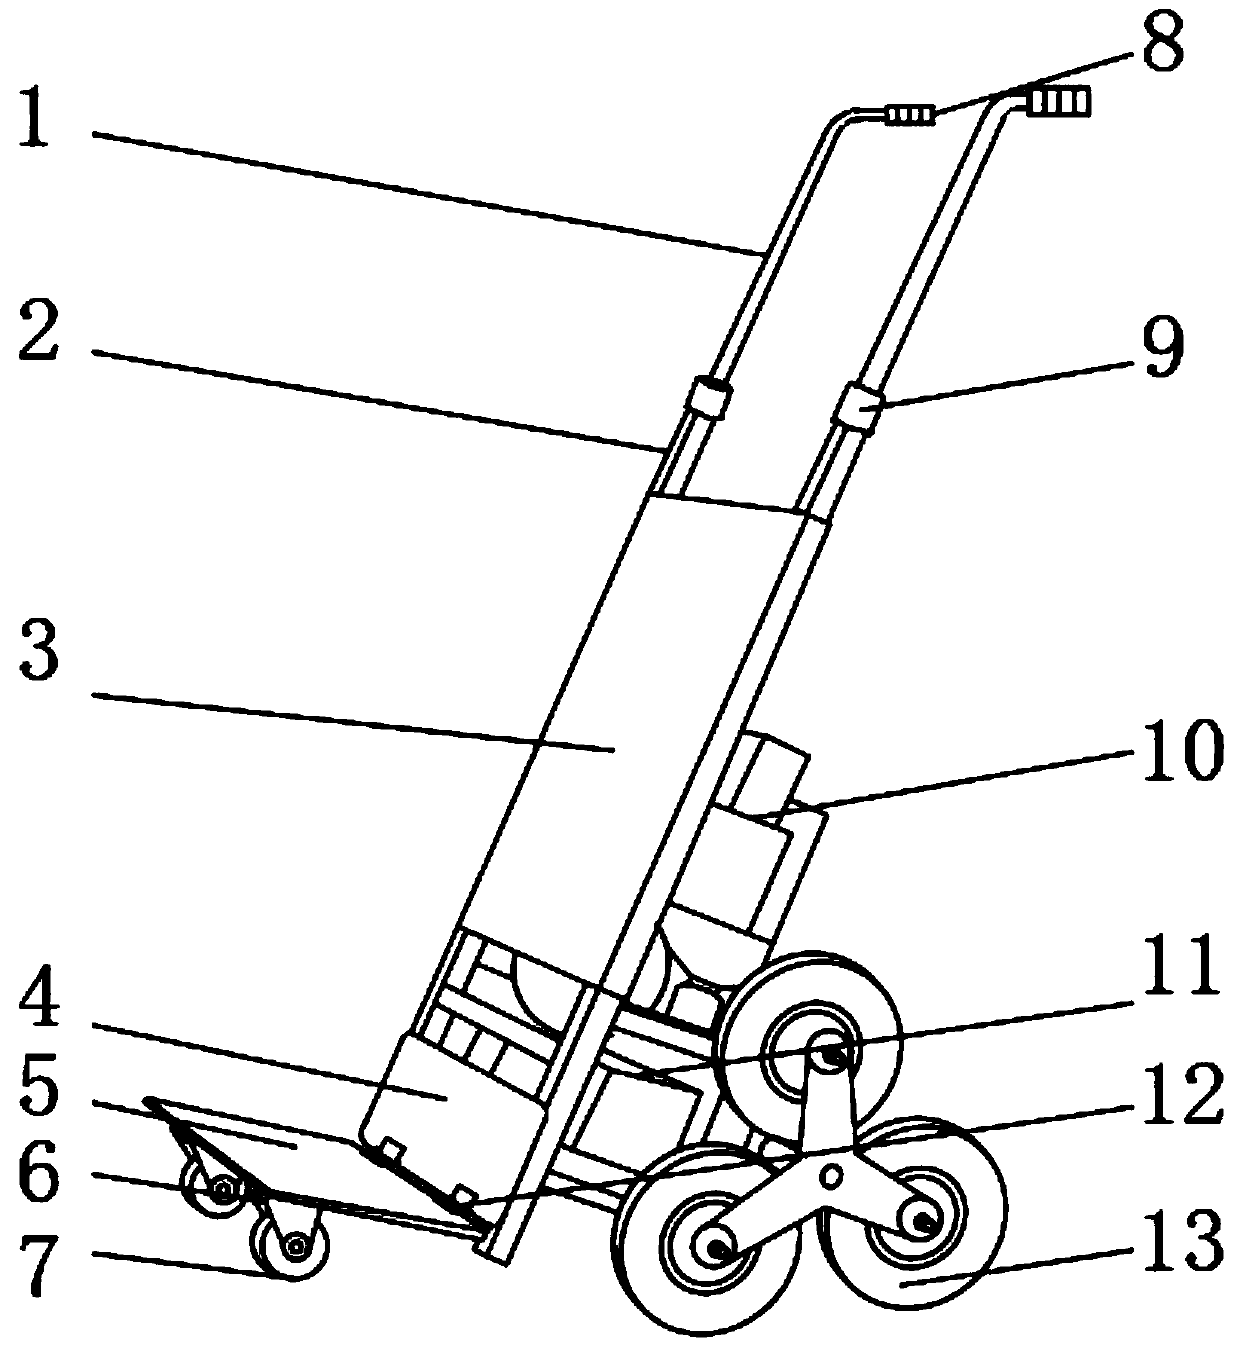 Auxiliary carrying device for office supplies